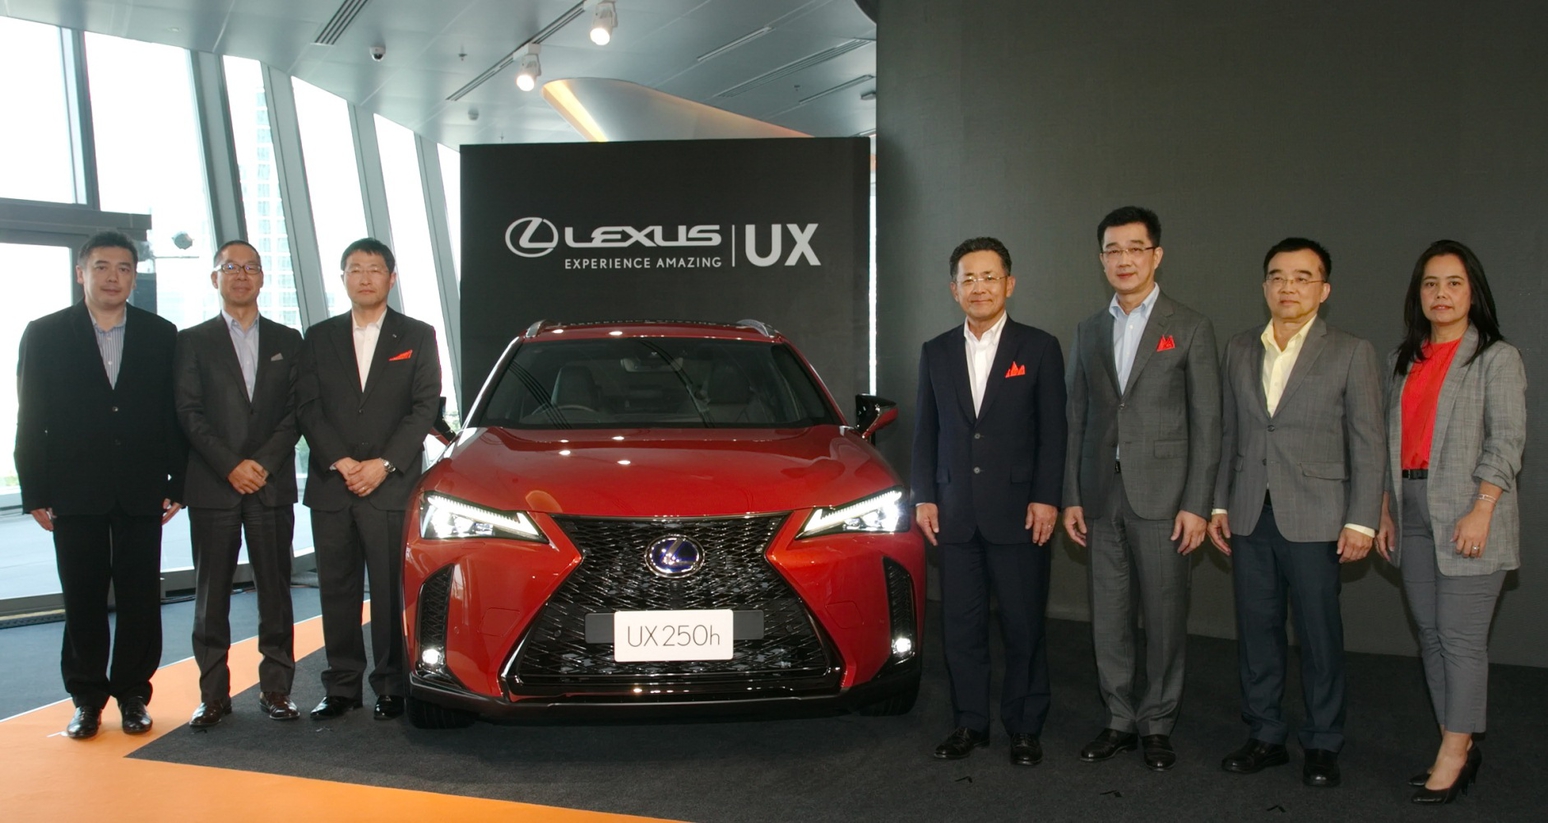 The All-New Lexus UX